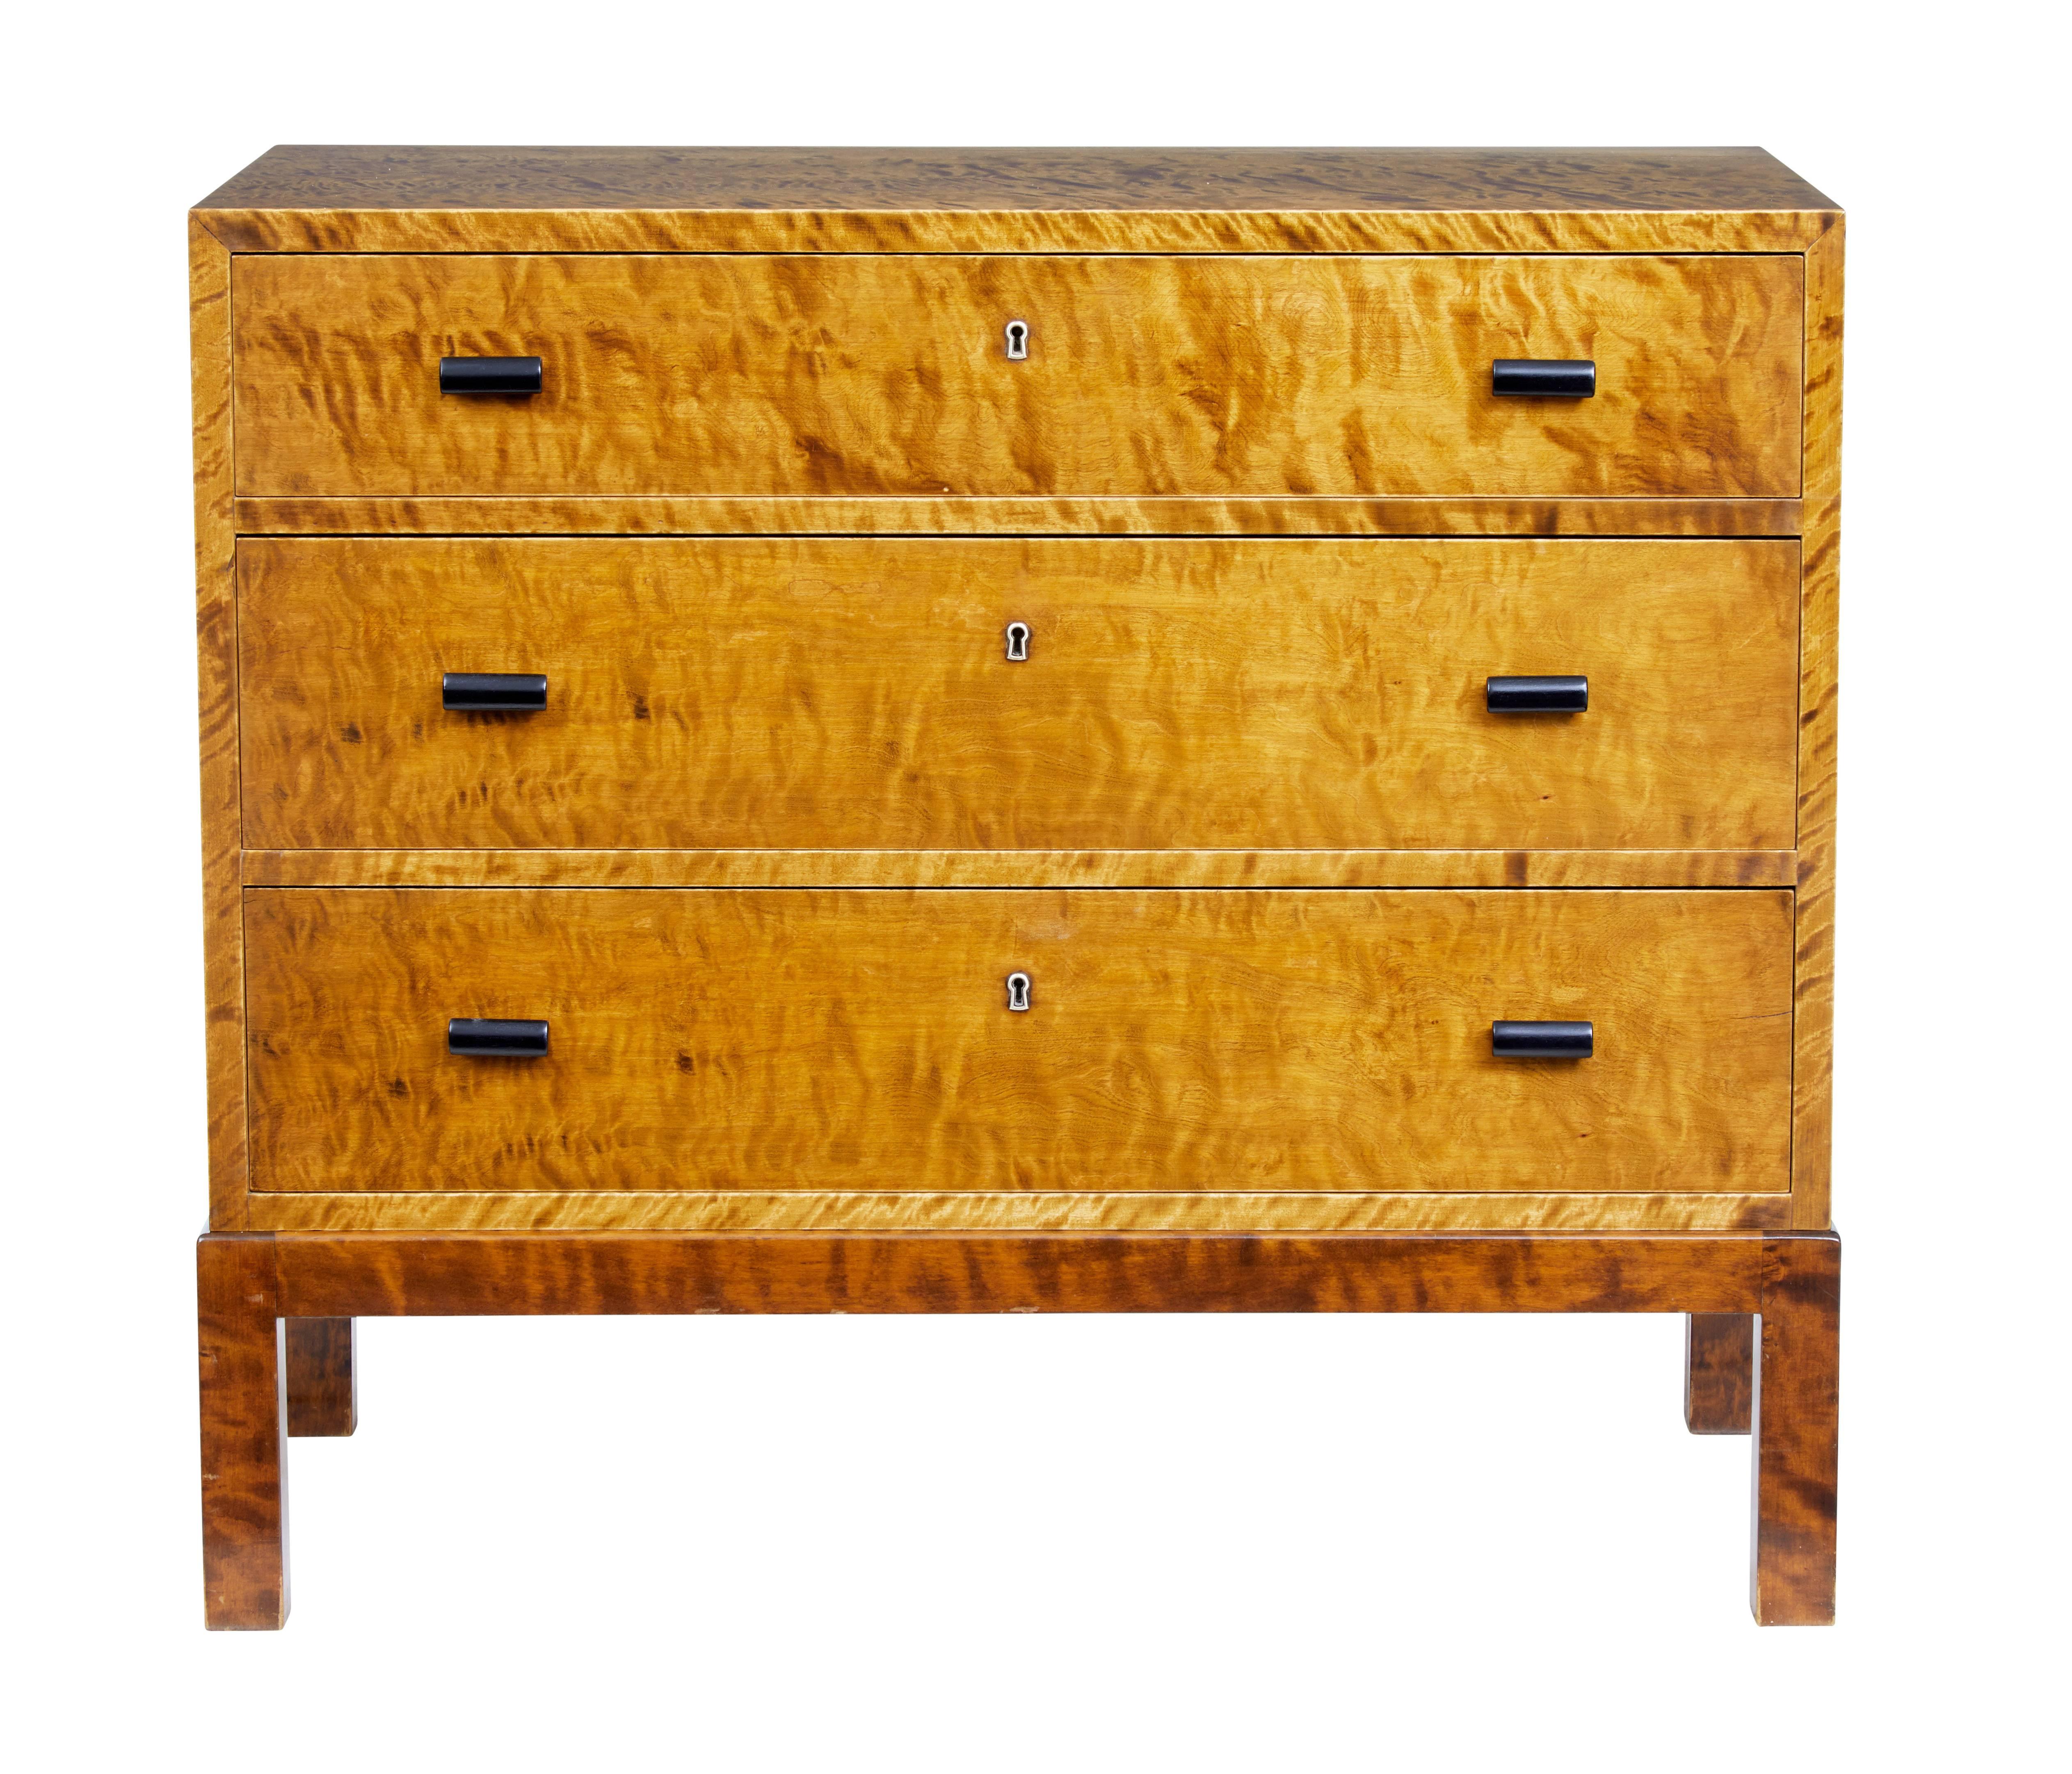 Fine quality Art Deco inspired Swedish chest of drawers, circa 1960.

Made from quarter sawn birch veneers which gives it this tiger like appearance.
Three drawers with ebonised handles.

Rich golden colour.
 